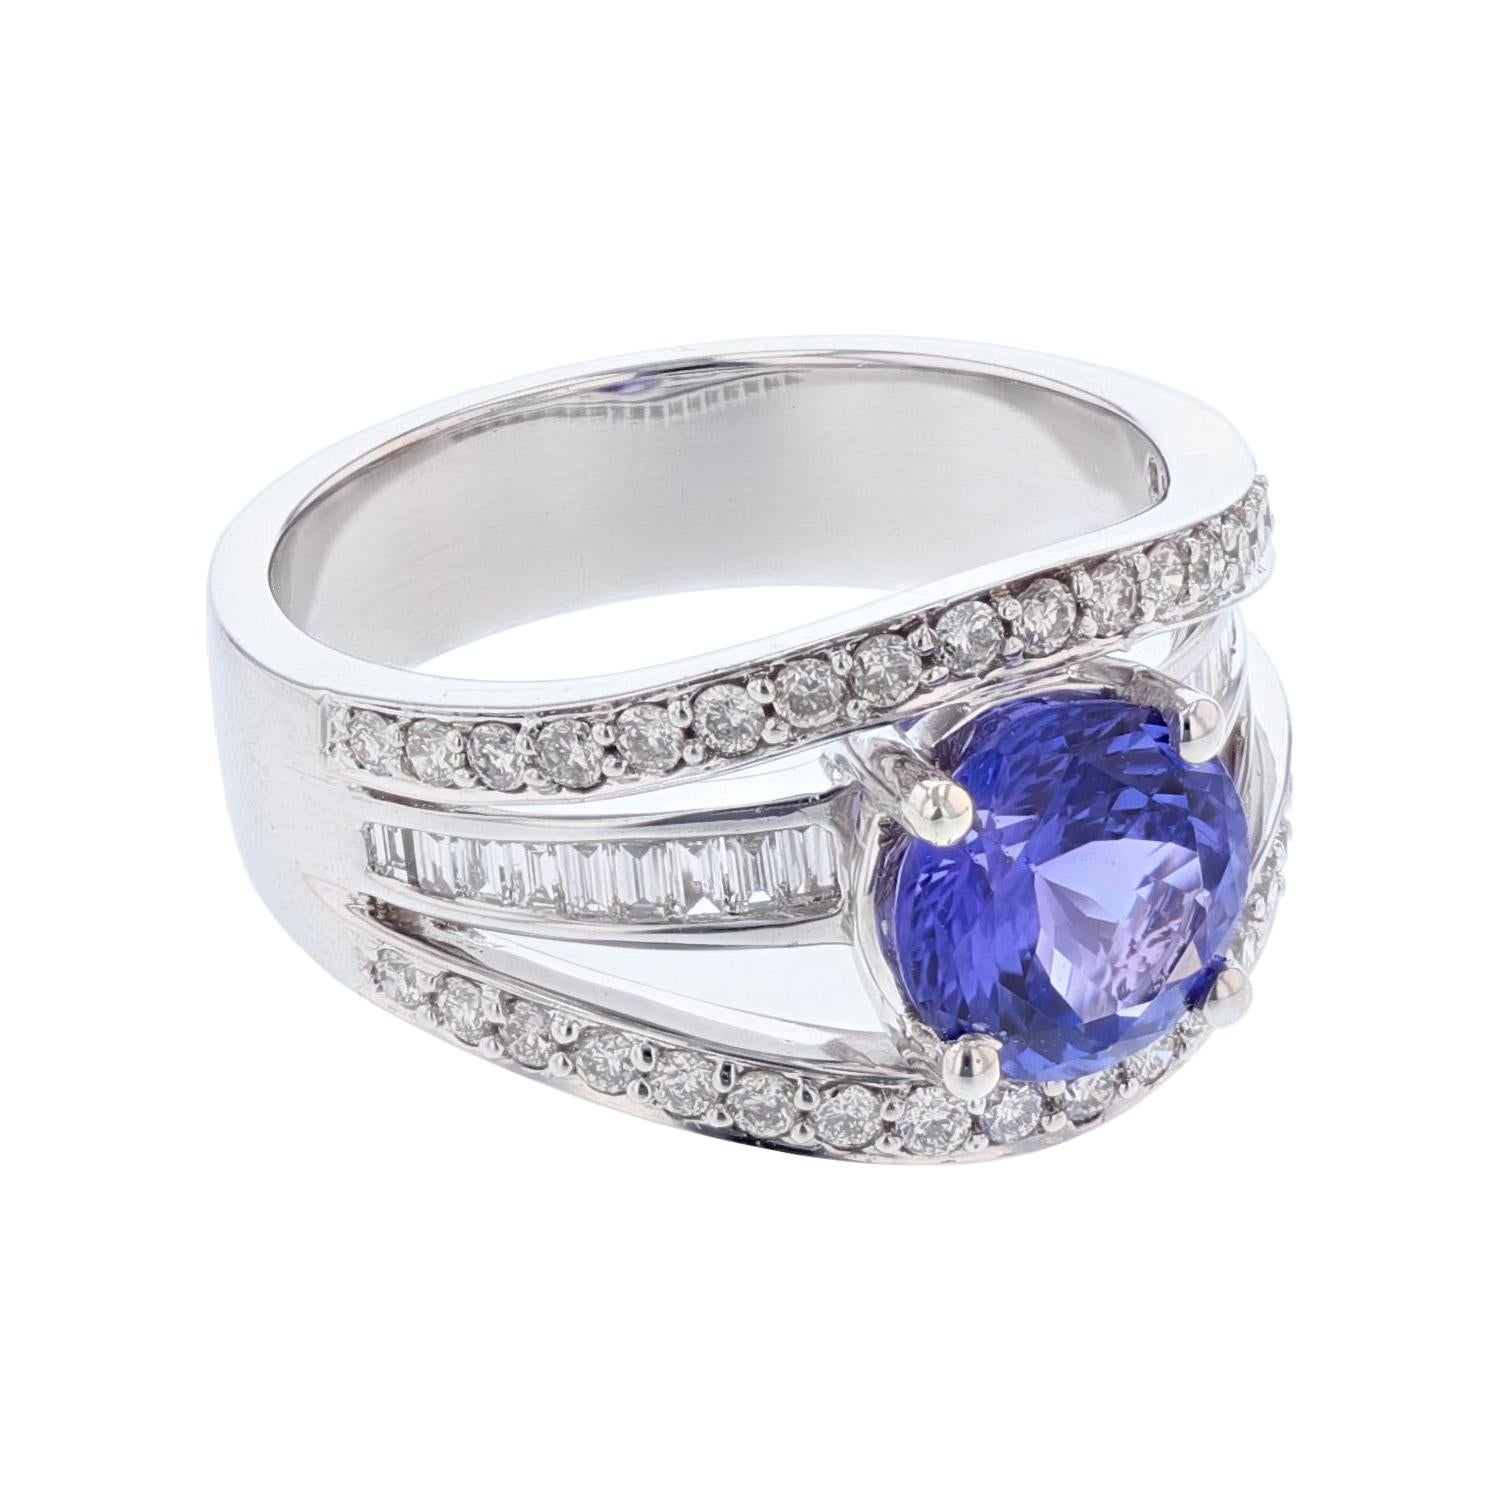 This ring is made in 18 karat white gold. The center stone is an round cut tanzanite weighing 1.82 carats and is prong set. The mounting features 36 round cut, prong set diamonds weighing 0.46 carats and 18 baguette cut diamonds weighing 0.23 carats